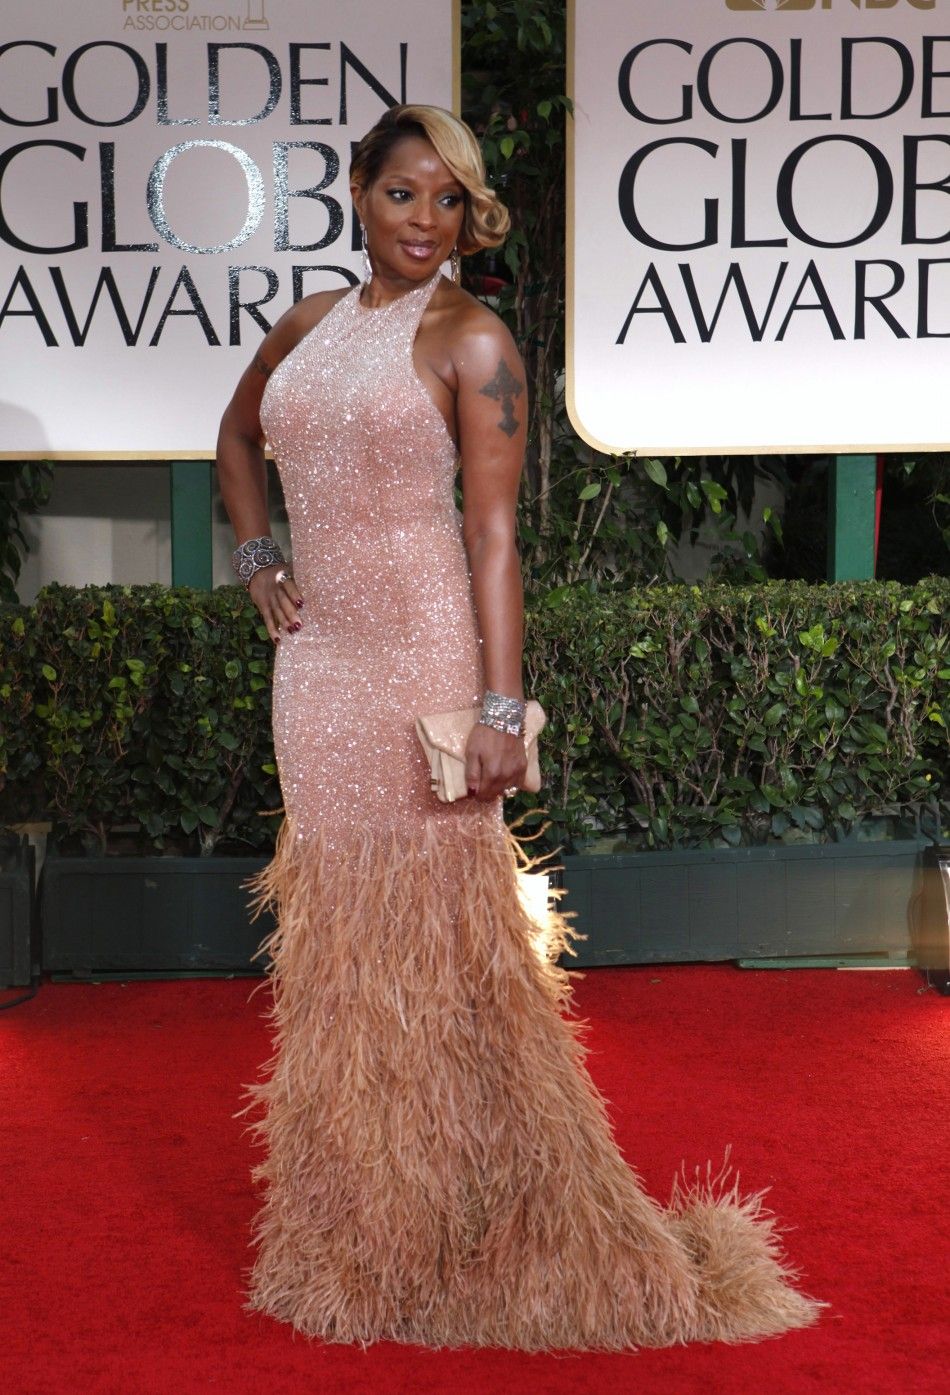 Singer Mary J. Blige poses as she arrives at the 69th annual Golden Globe Awards in Beverly Hills, California January 15, 2012. 